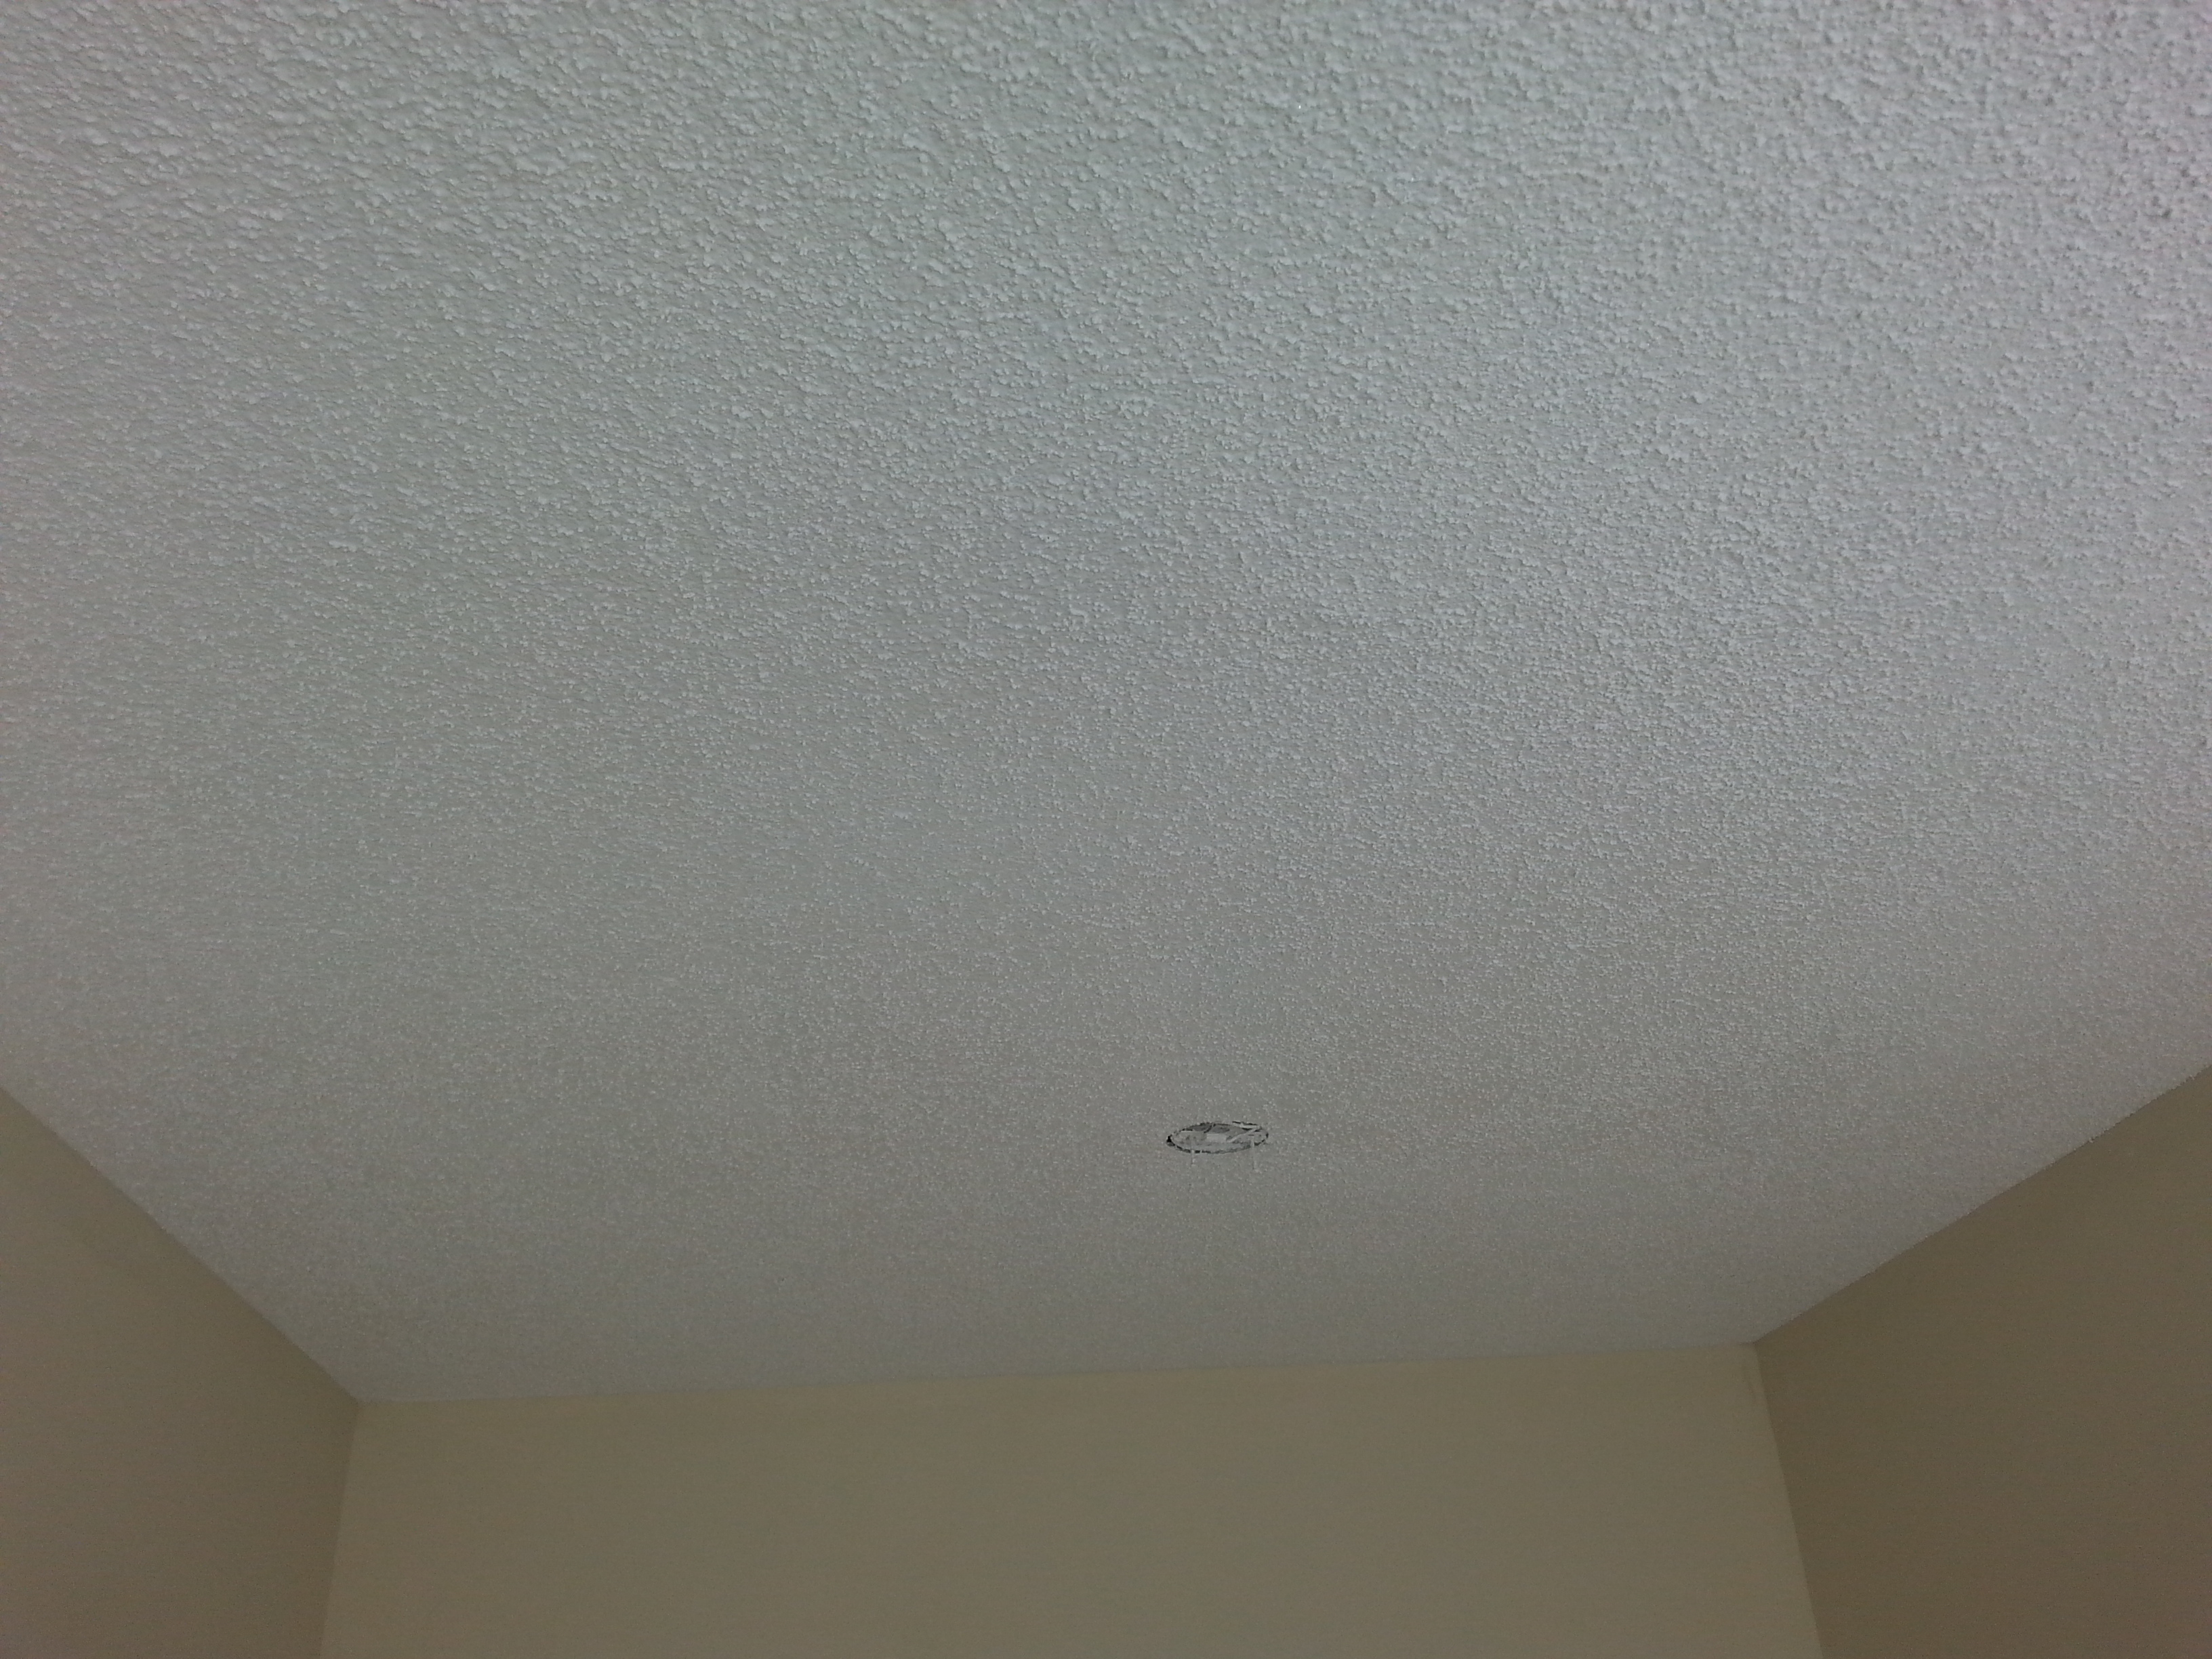 Water Stains On Your Ceiling Common Causes Solution